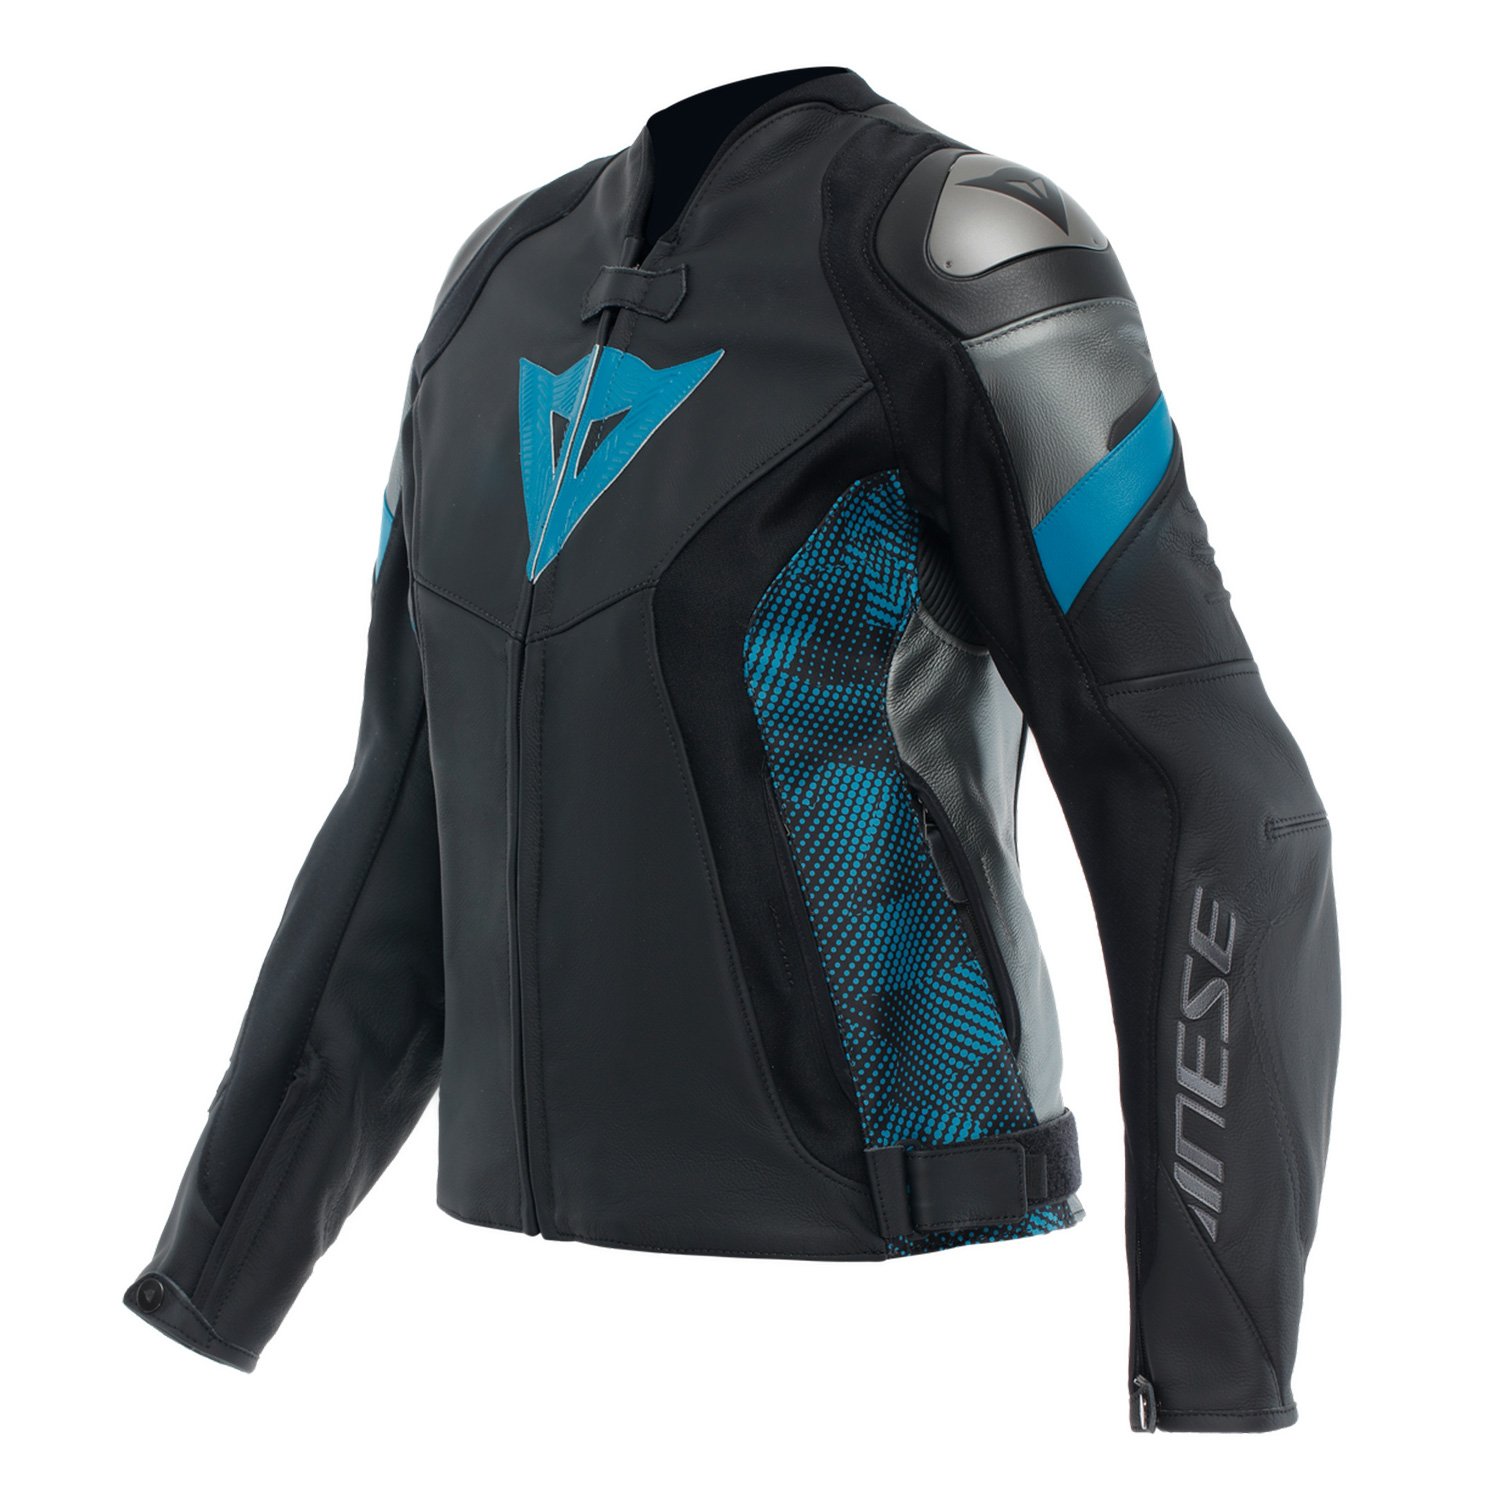 Image of Dainese Avro 5 Leather Jacket WMN Black Teal Anthracite Talla 46